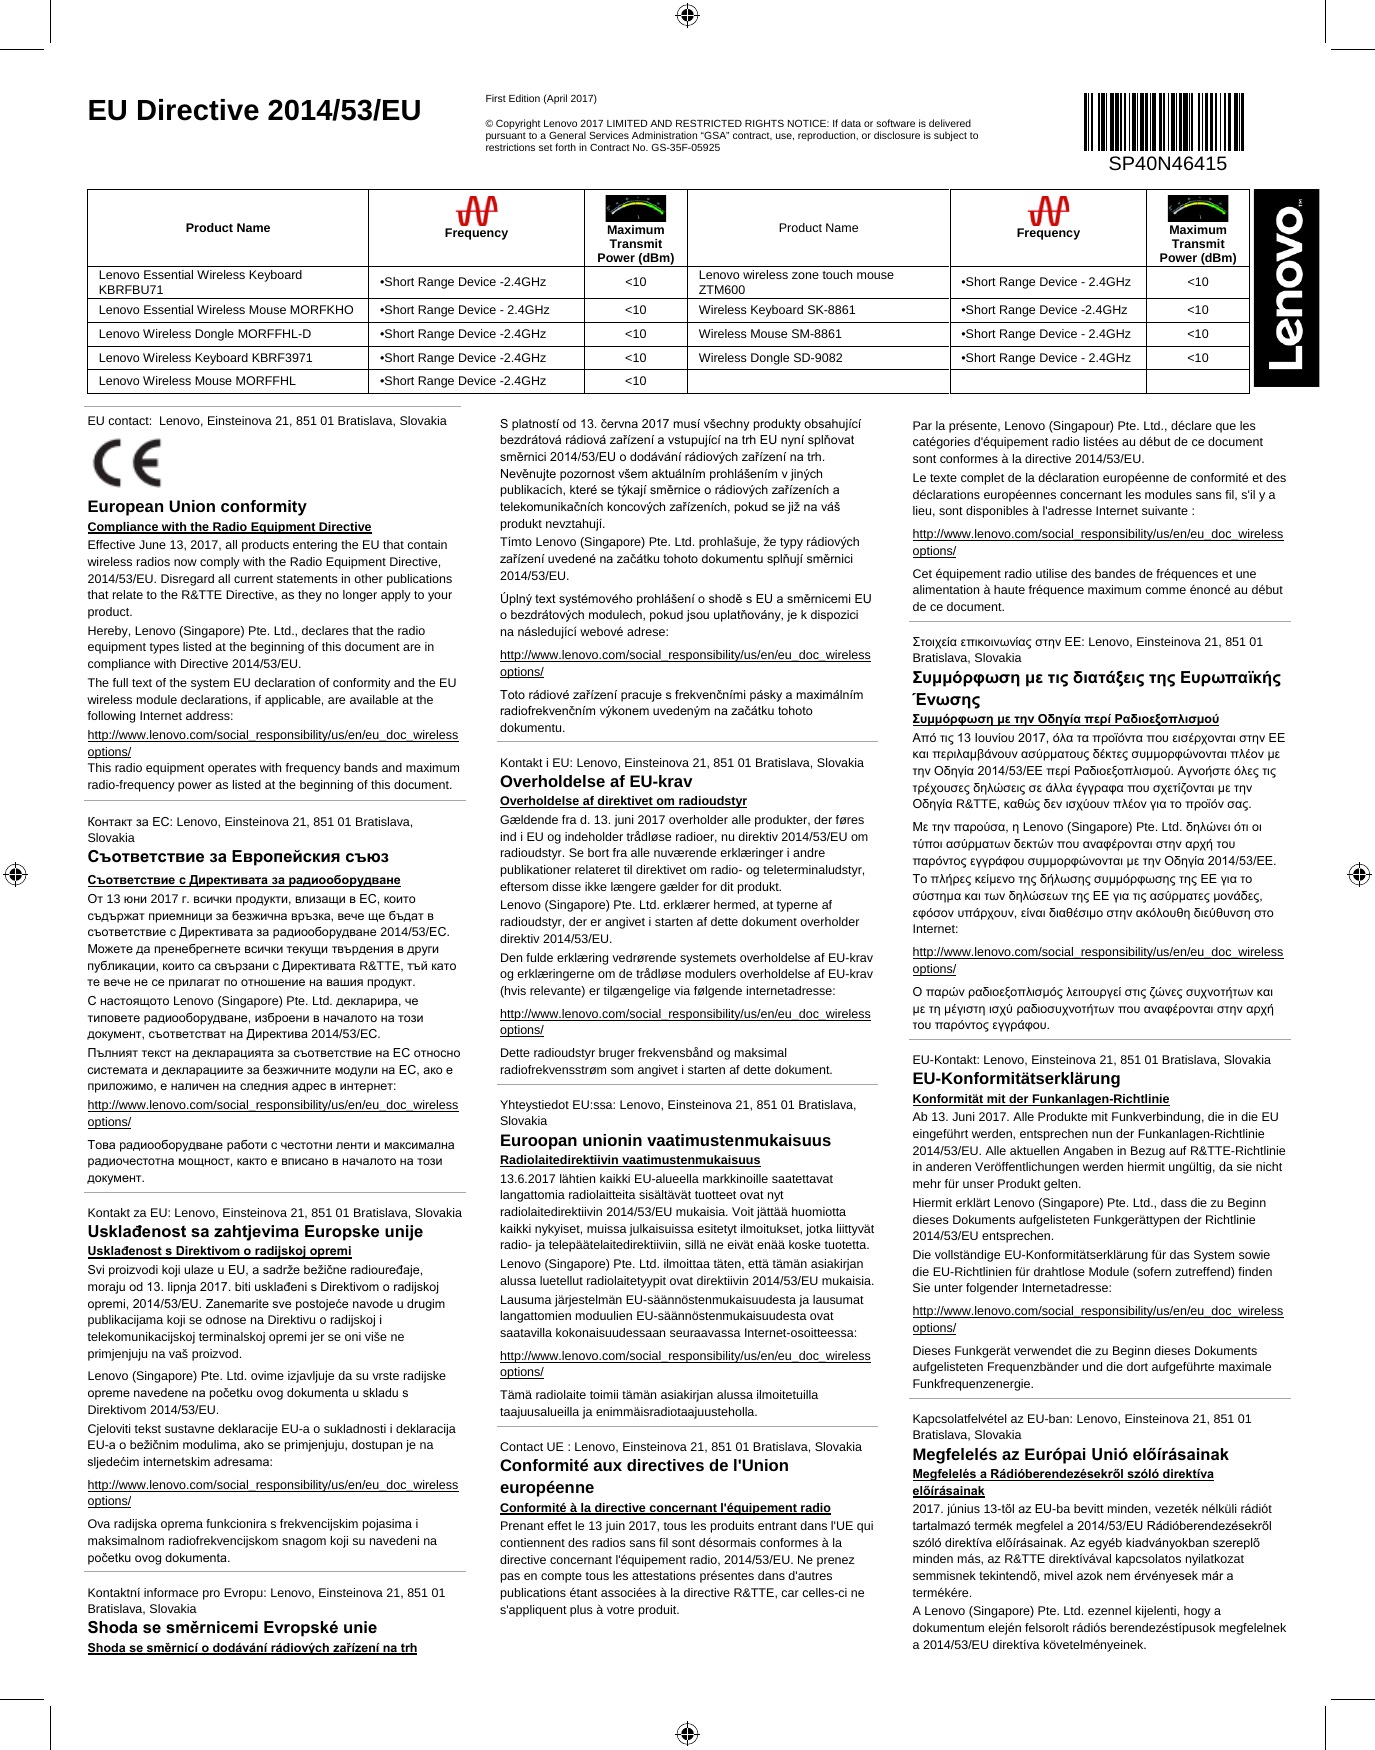 Page 1 of 2 - Lenovo M715Ts Sp40N46415 Eu Red Wireless Kbmc Directive 2014/53/EU User Manual Keyboard/Mouse Flyer - Think Centre M715t And M715s Desktop (Think Centre) Type 10MB